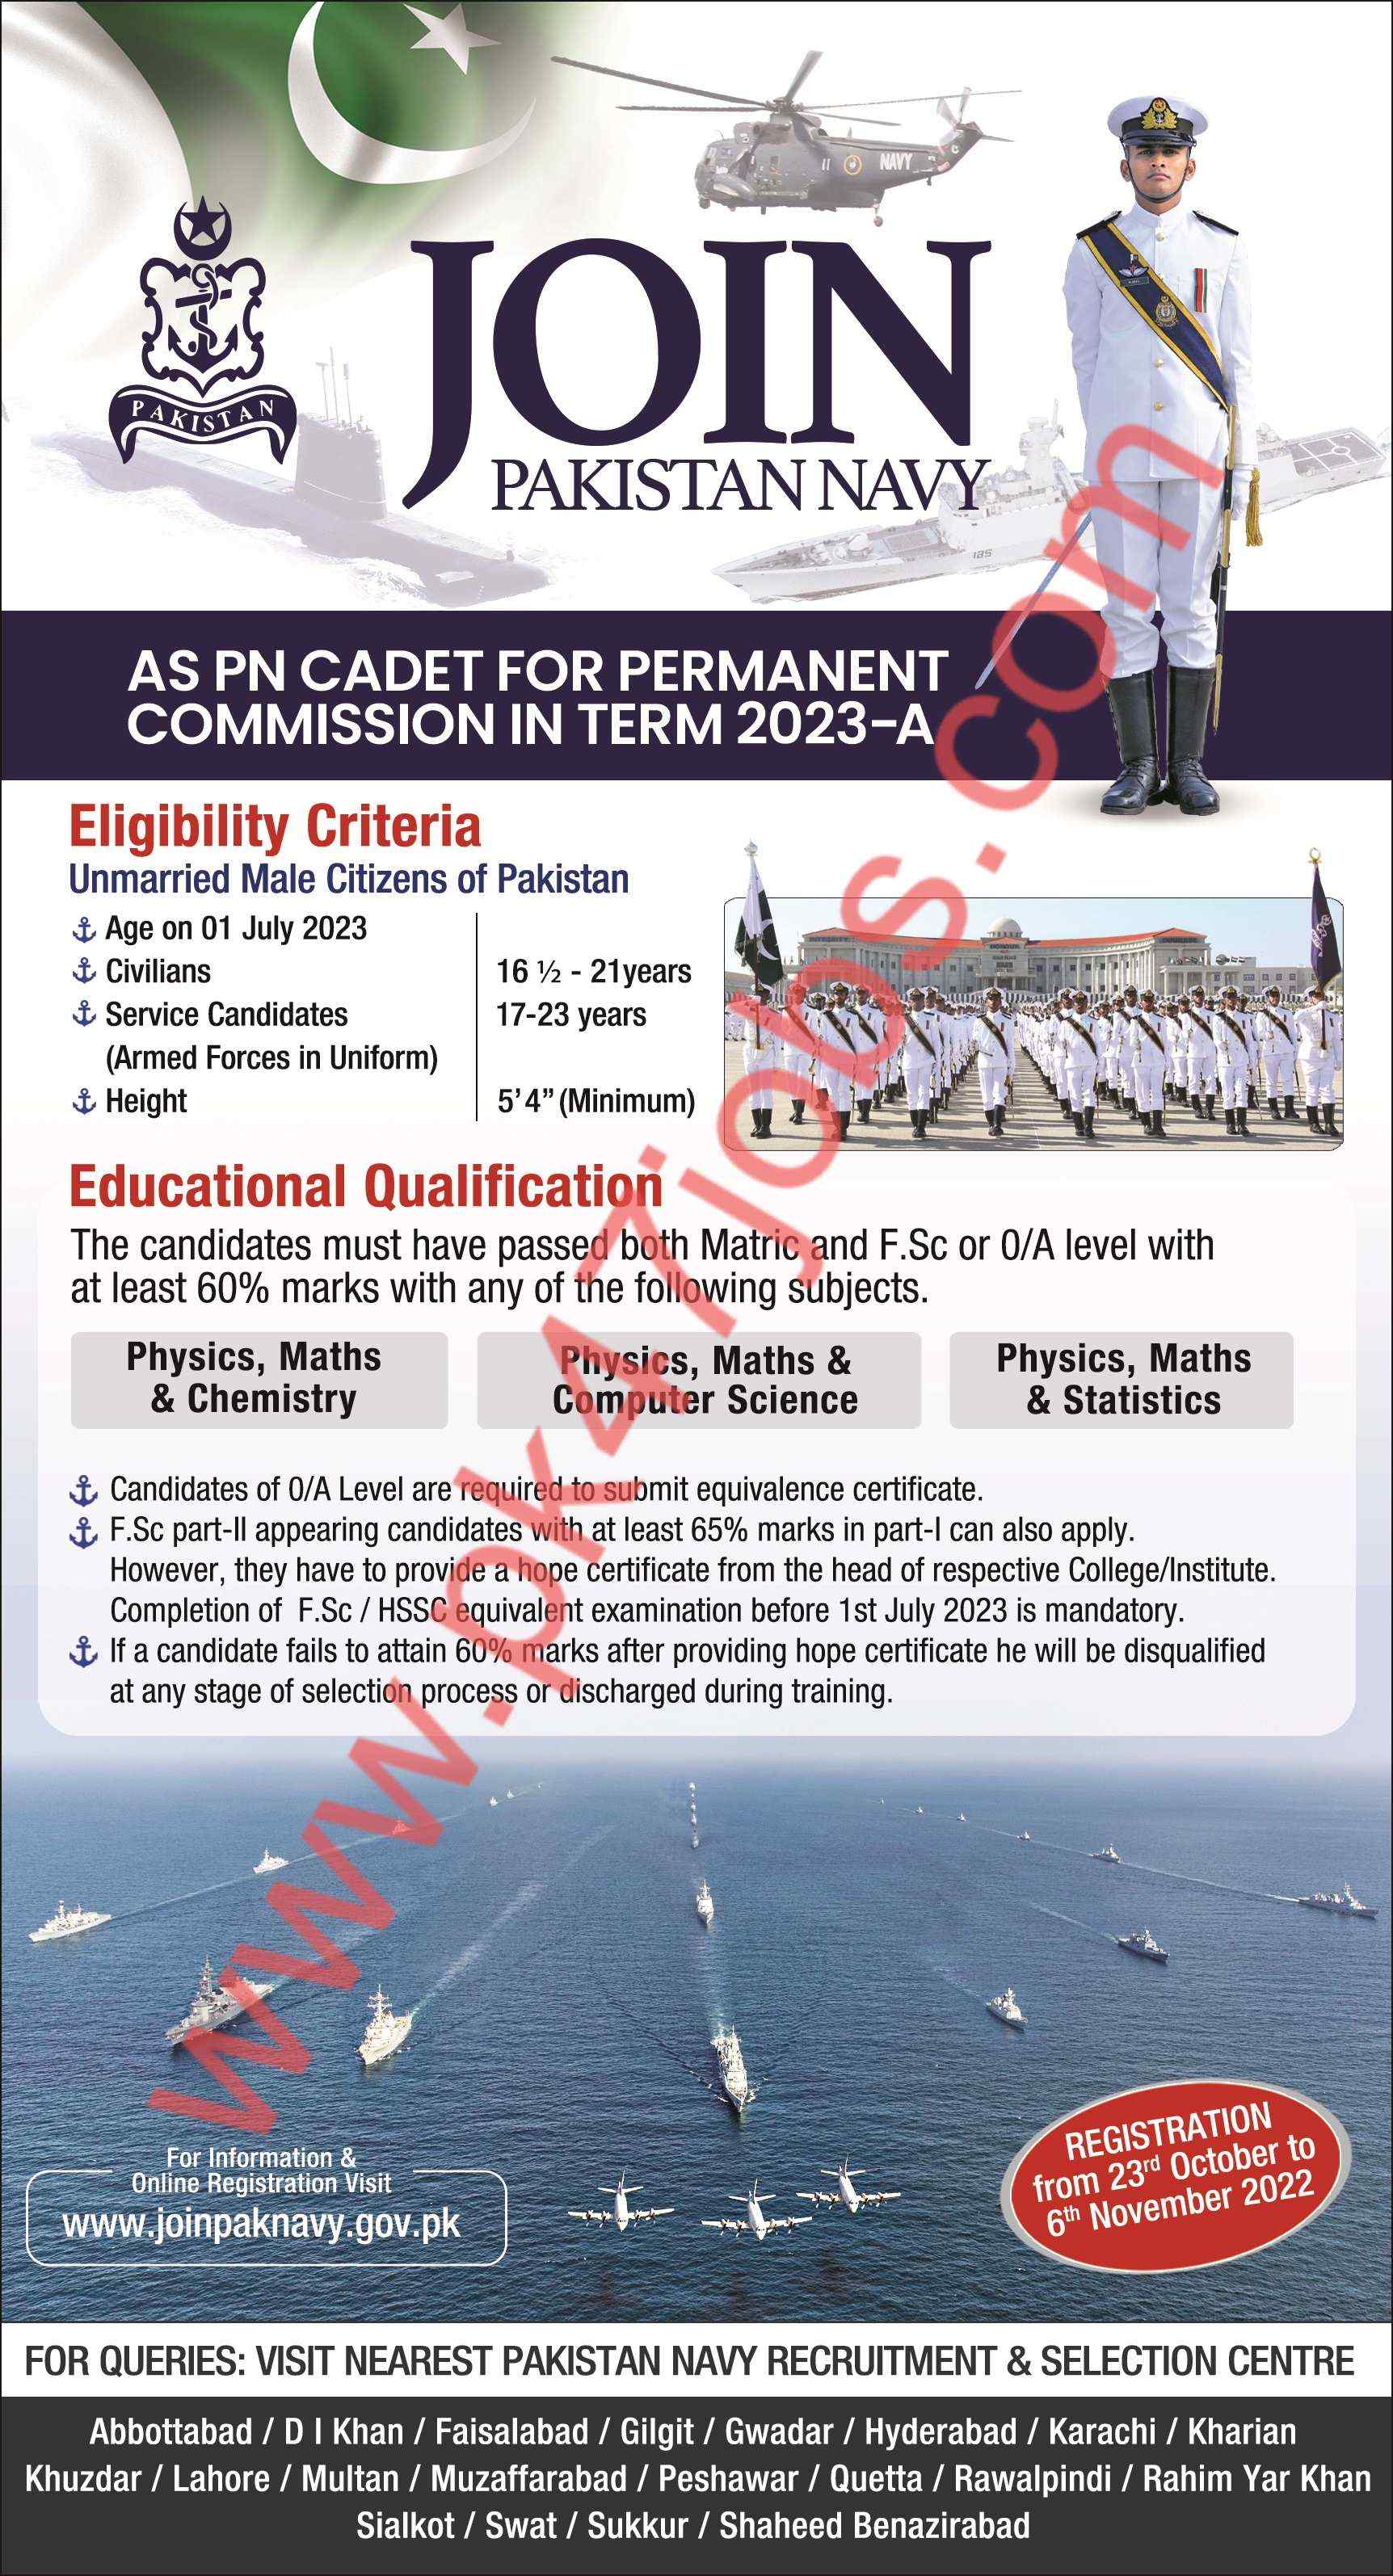 Join Pakistan Navy as PN Cadet October 2022 Online Registration Permanent Commission in Term 2023-A